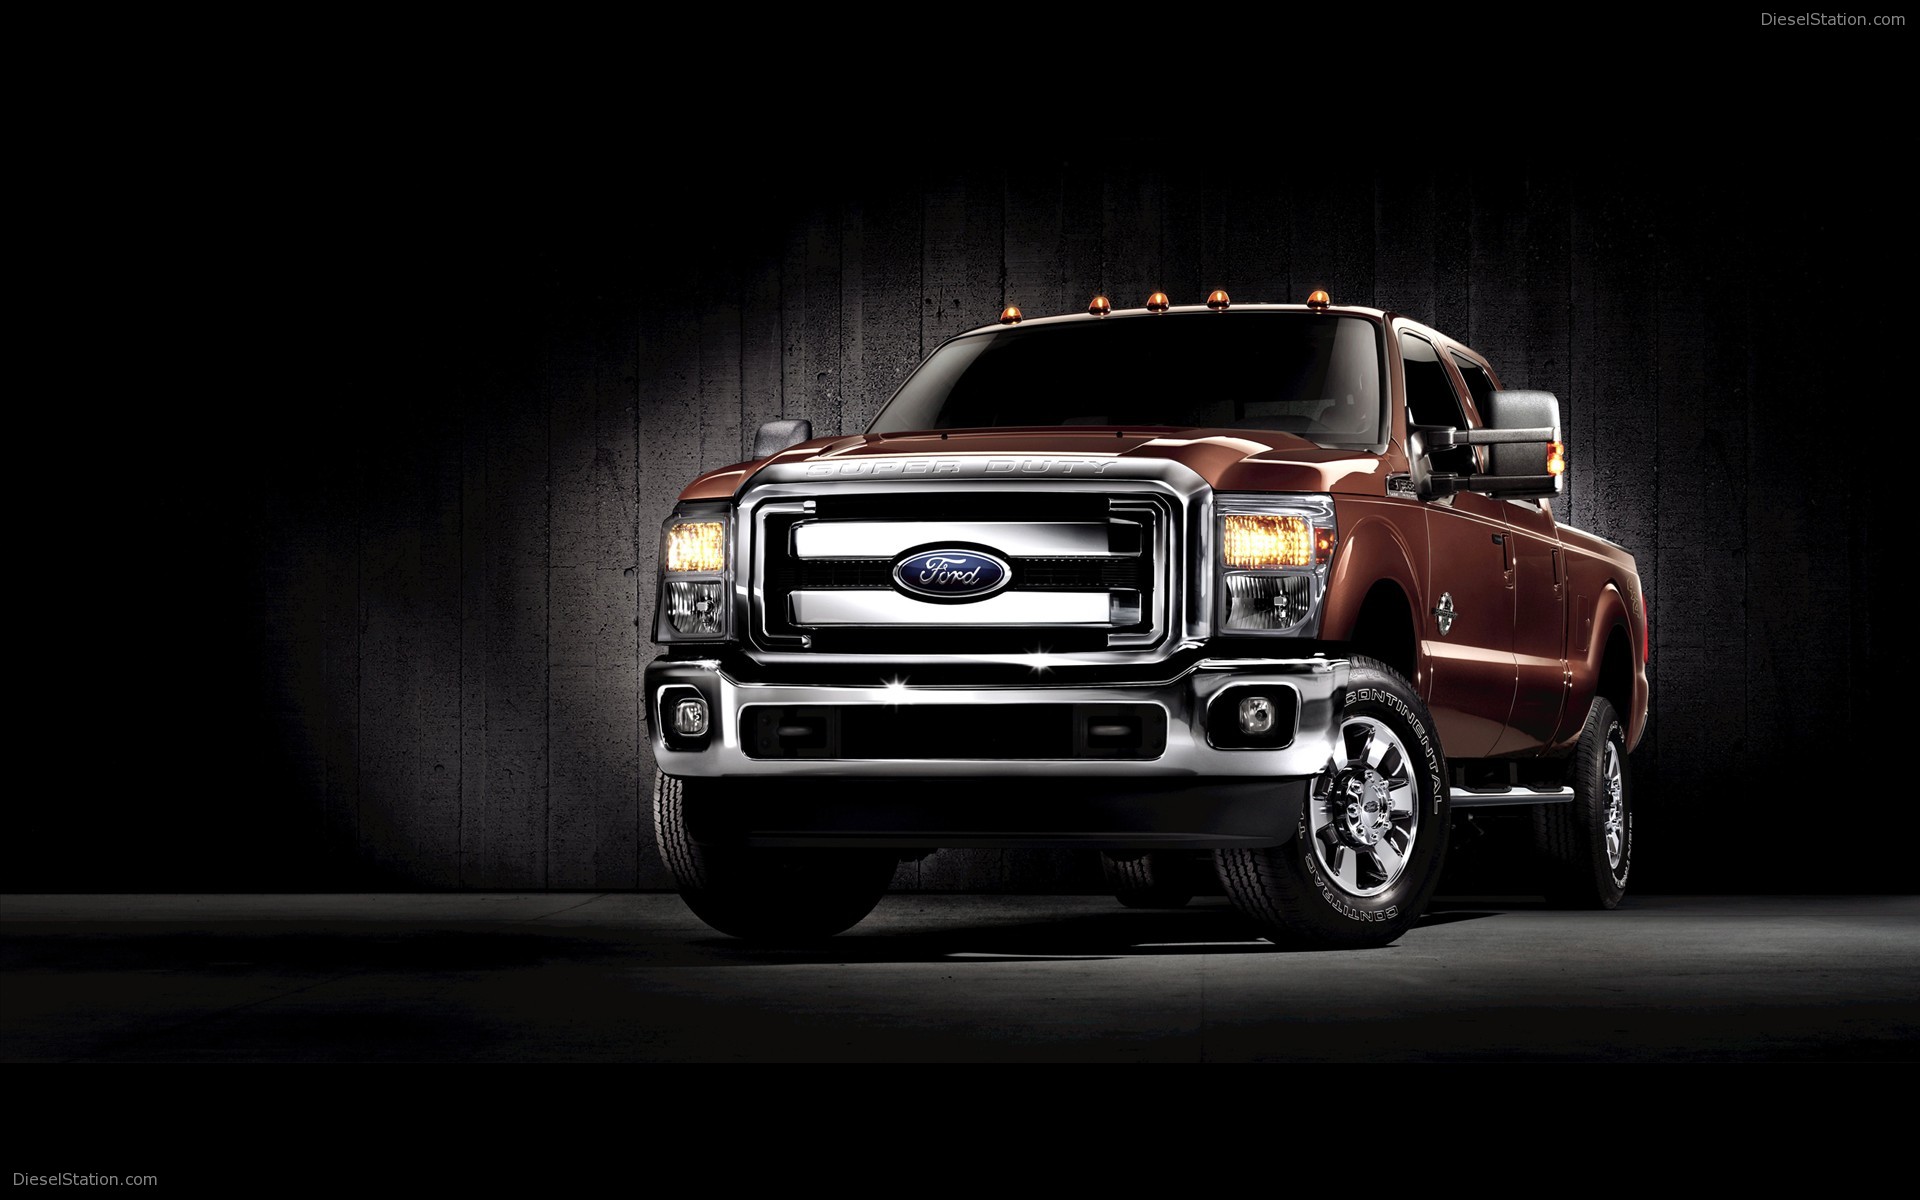 Ford F Series Super Duty Widescreen Exotic Car Wallpaper Of